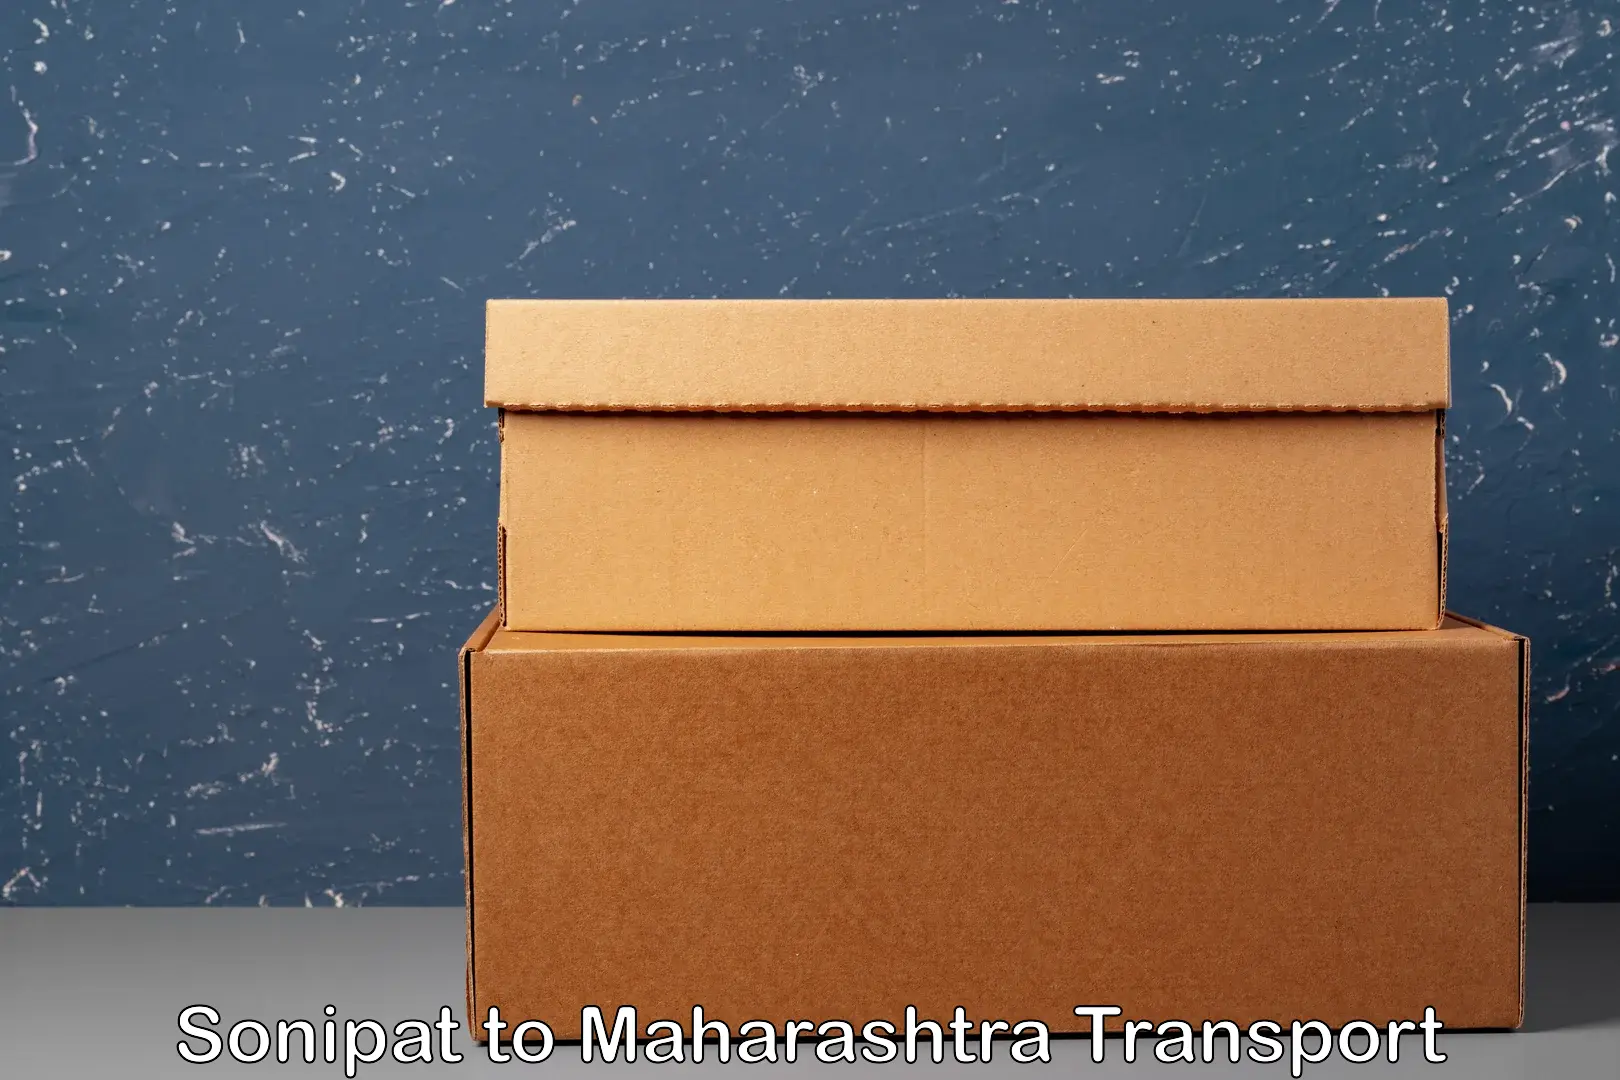 Container transport service Sonipat to Lakhandur